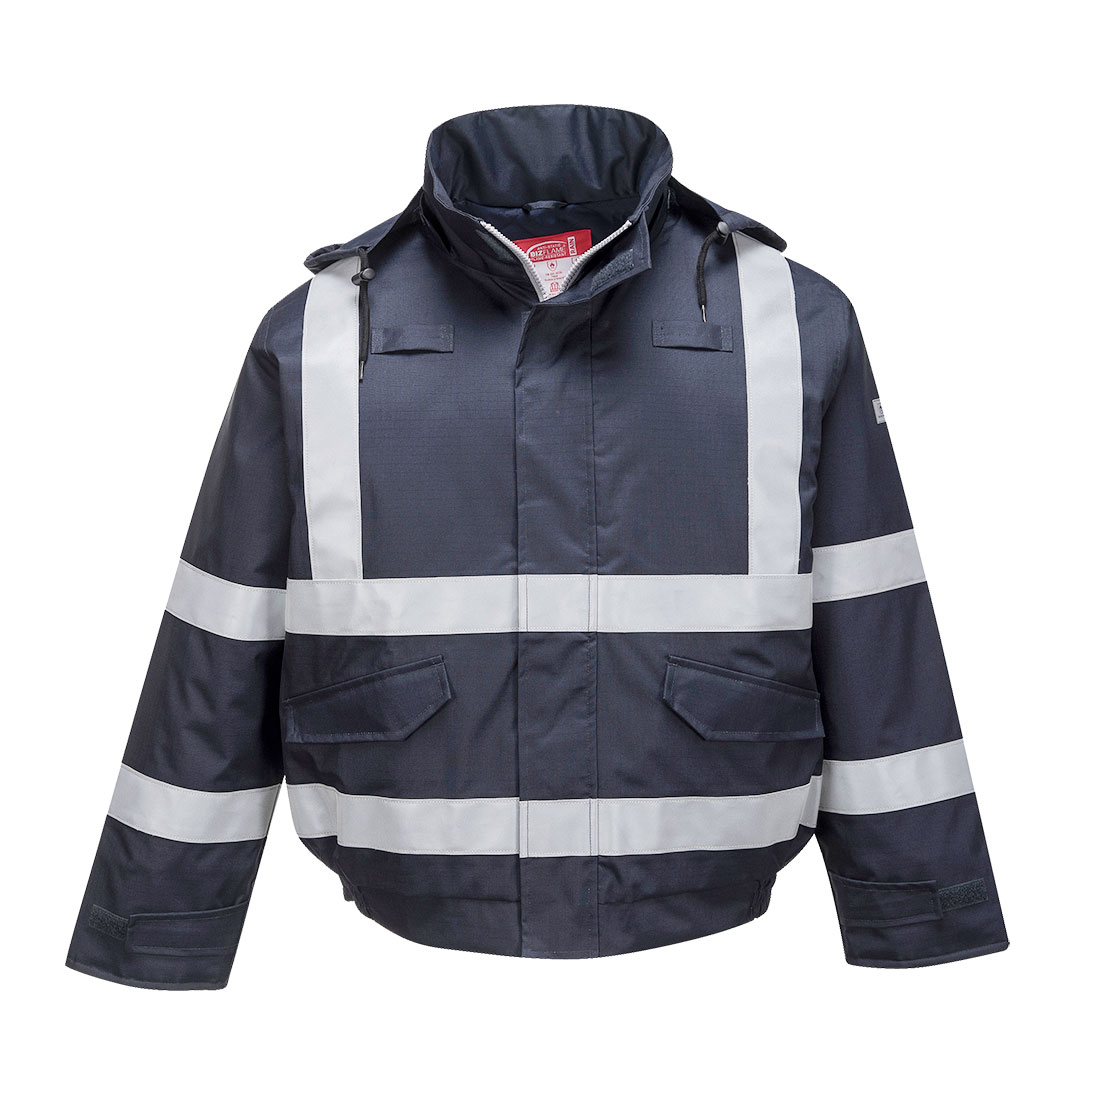 S783 Portwest® Bizflame® Flame-Resistant Anti-Static Rain Bomber Jackets